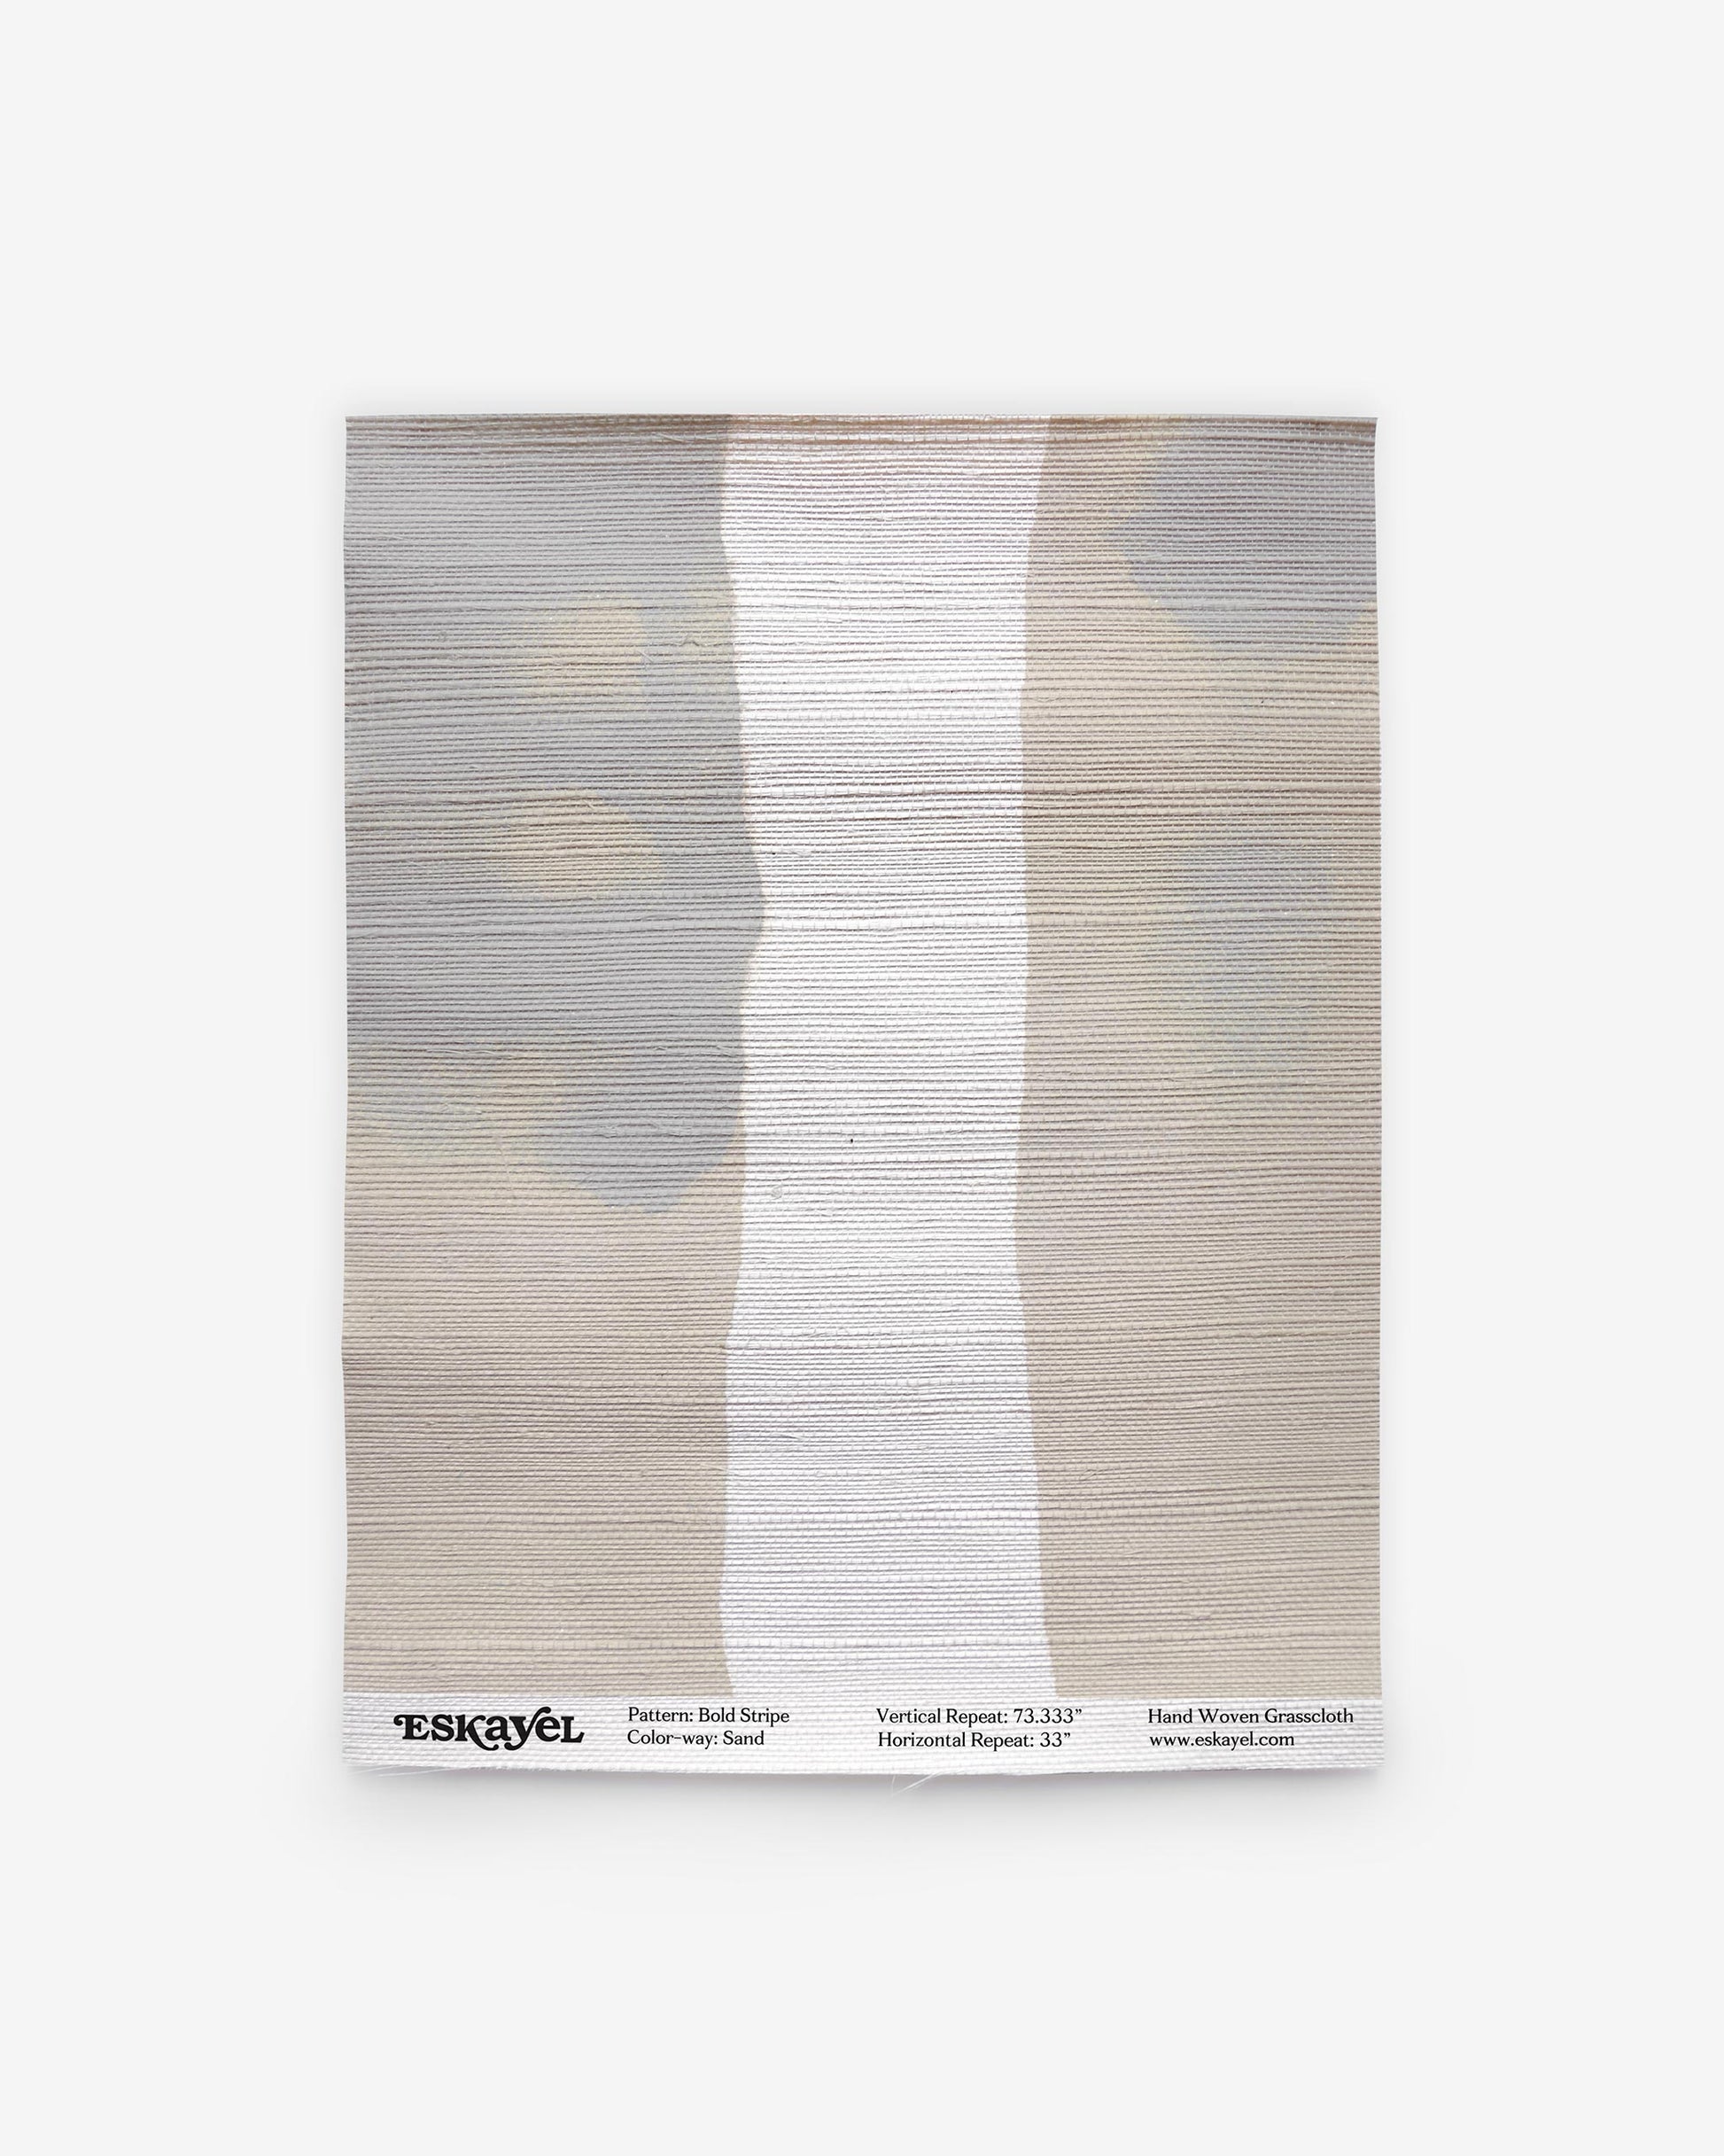 A Bold Stripe Grasscloth Sand piece of paper on wallpaper